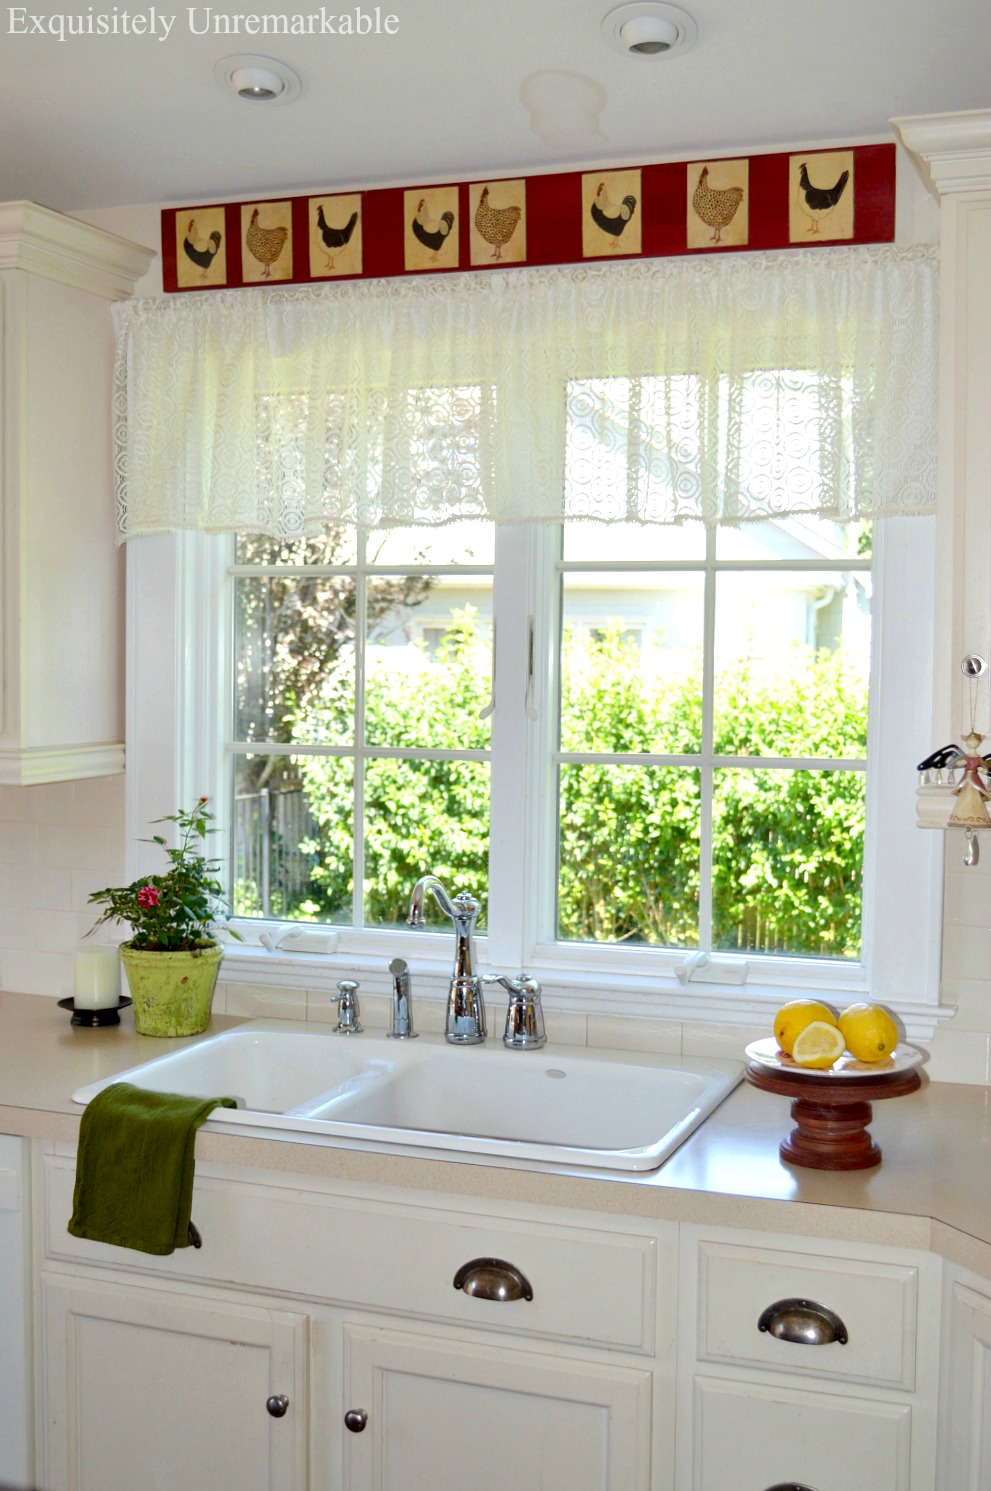 Lace Valance hanging in kitchen window